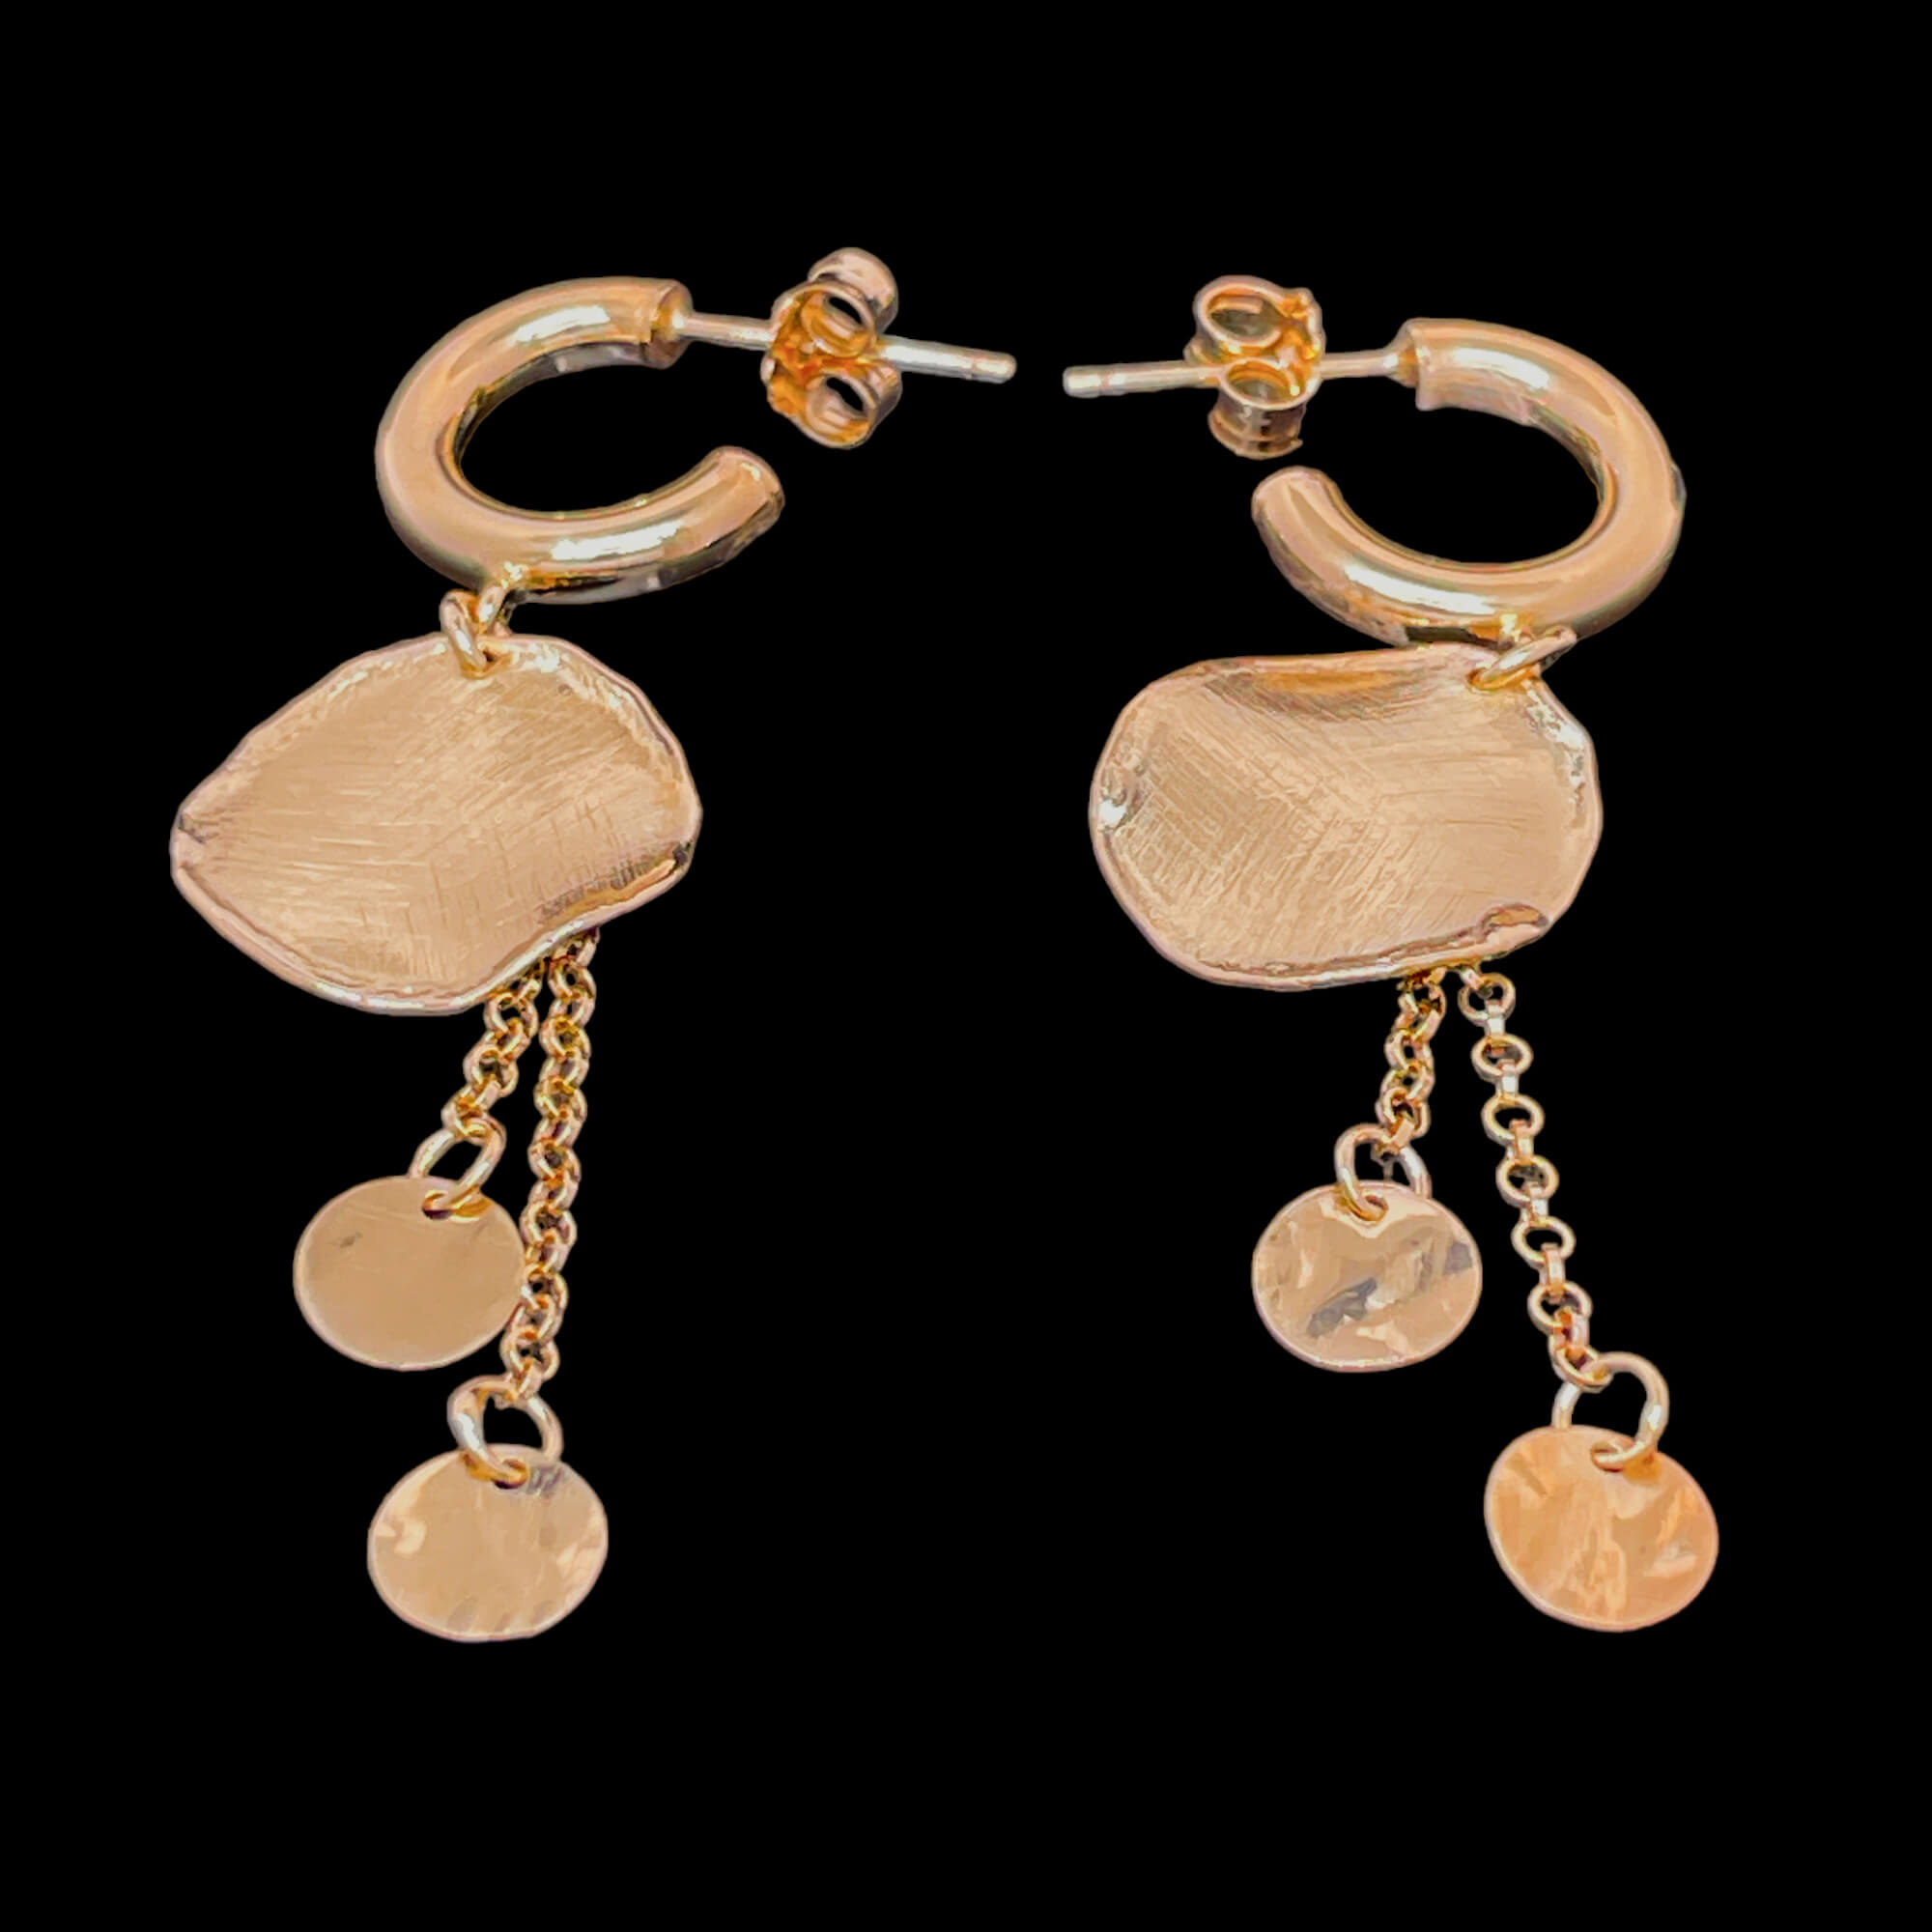 Small gilt Creoles with hanging adaptation